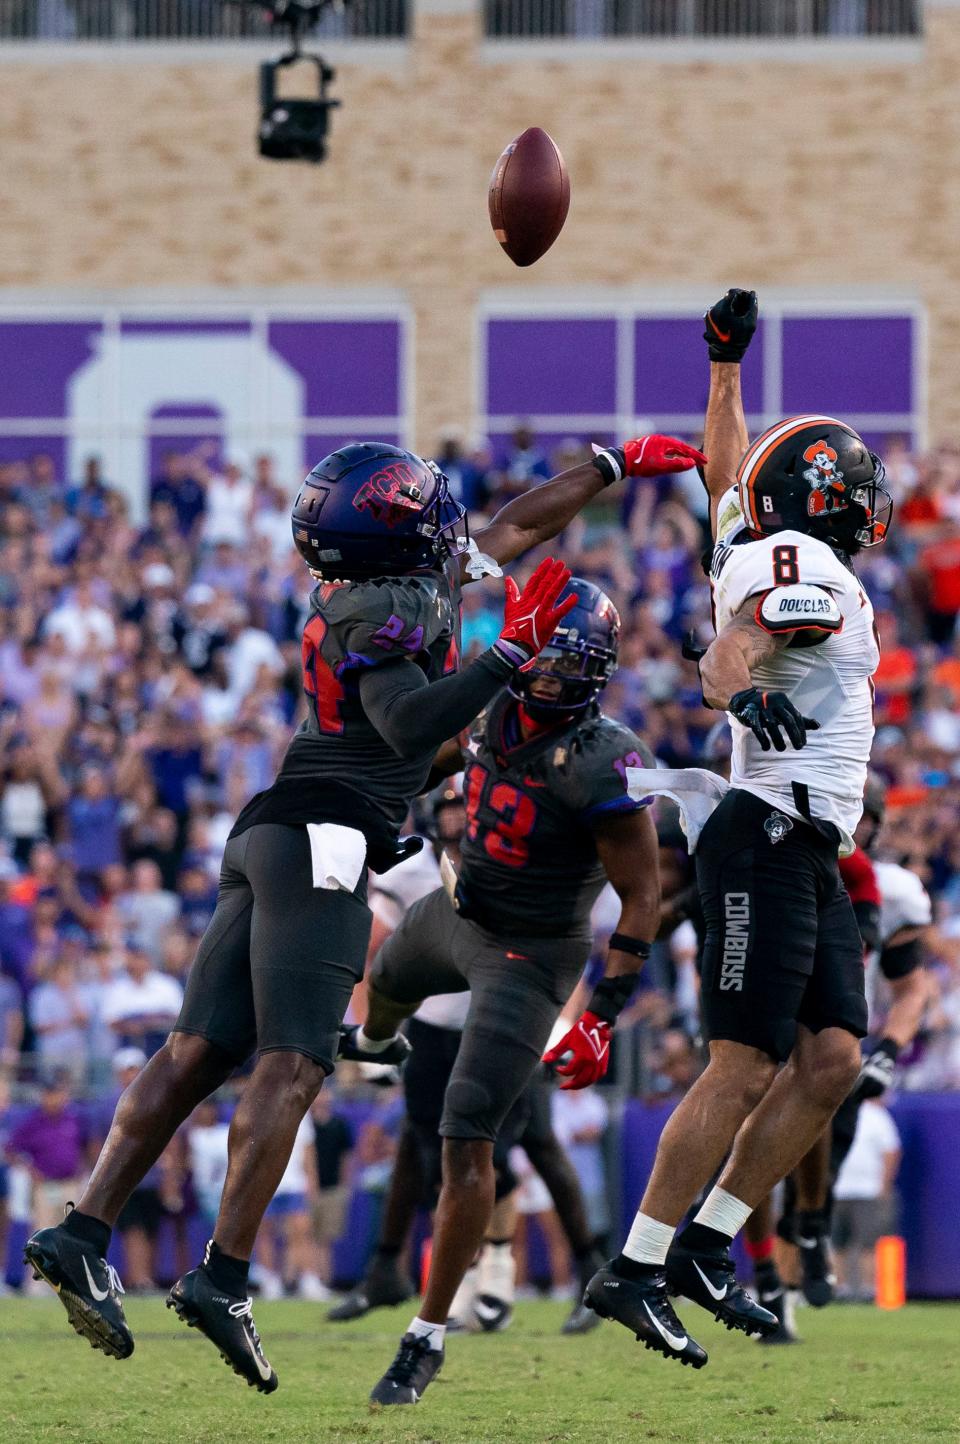 Oklahoma State wide receiver Braydon Johnson (8) misses a pass intended for him as TCU cornerback Josh Newton (24) defends during the second overtime period of an NCAA college football game in Fort Worth, Texas, Saturday, Oct. 15, 2022. (AP Photo/Sam Hodde)